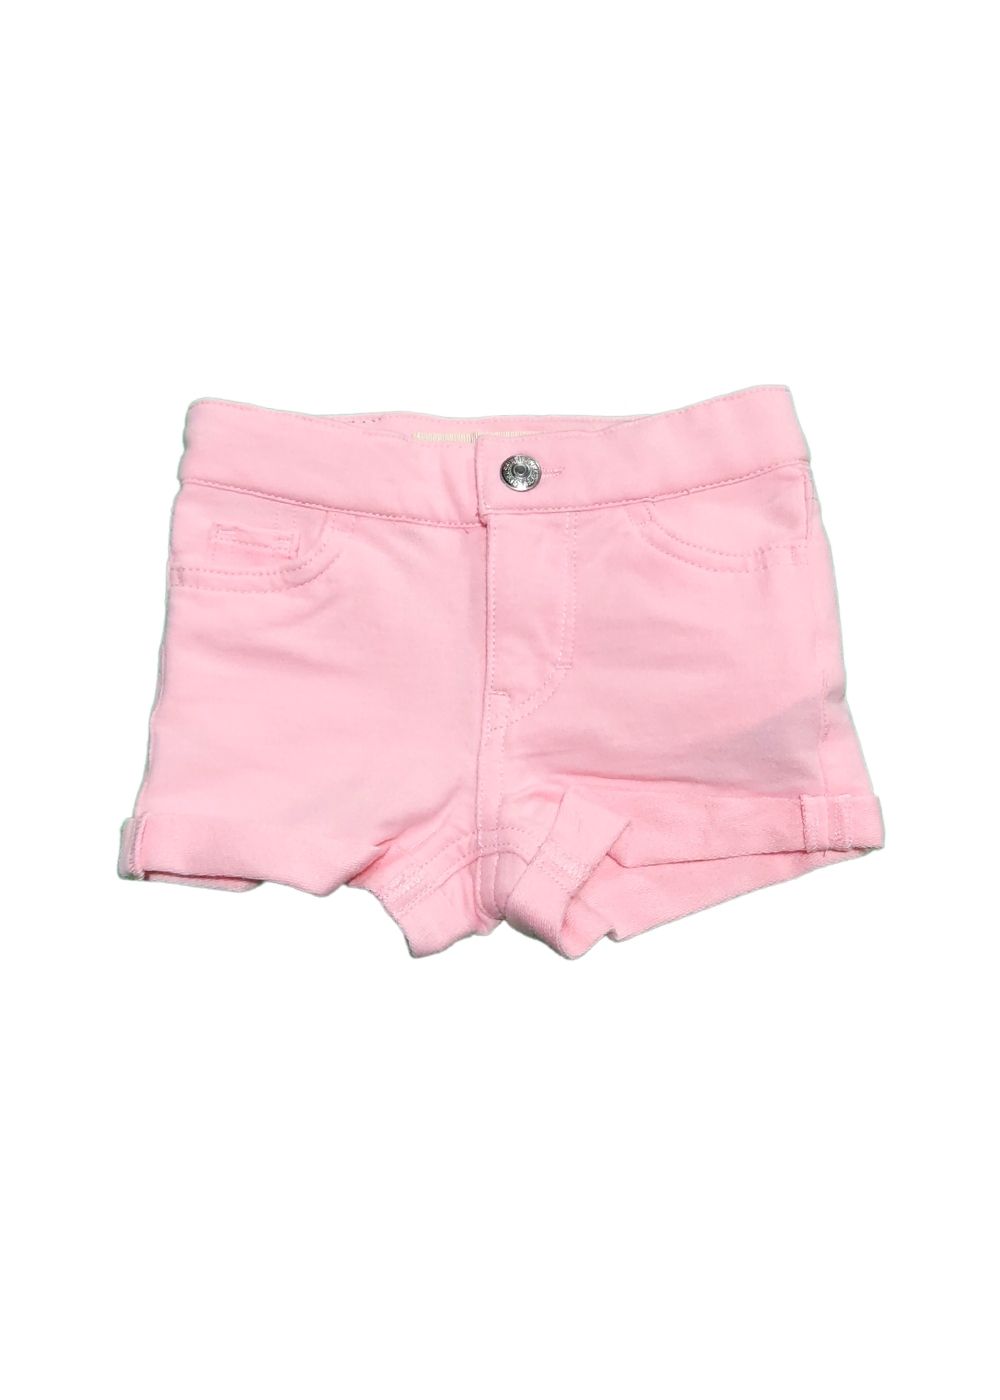 Featured image for “LEVI'S SHORTS ROSA”